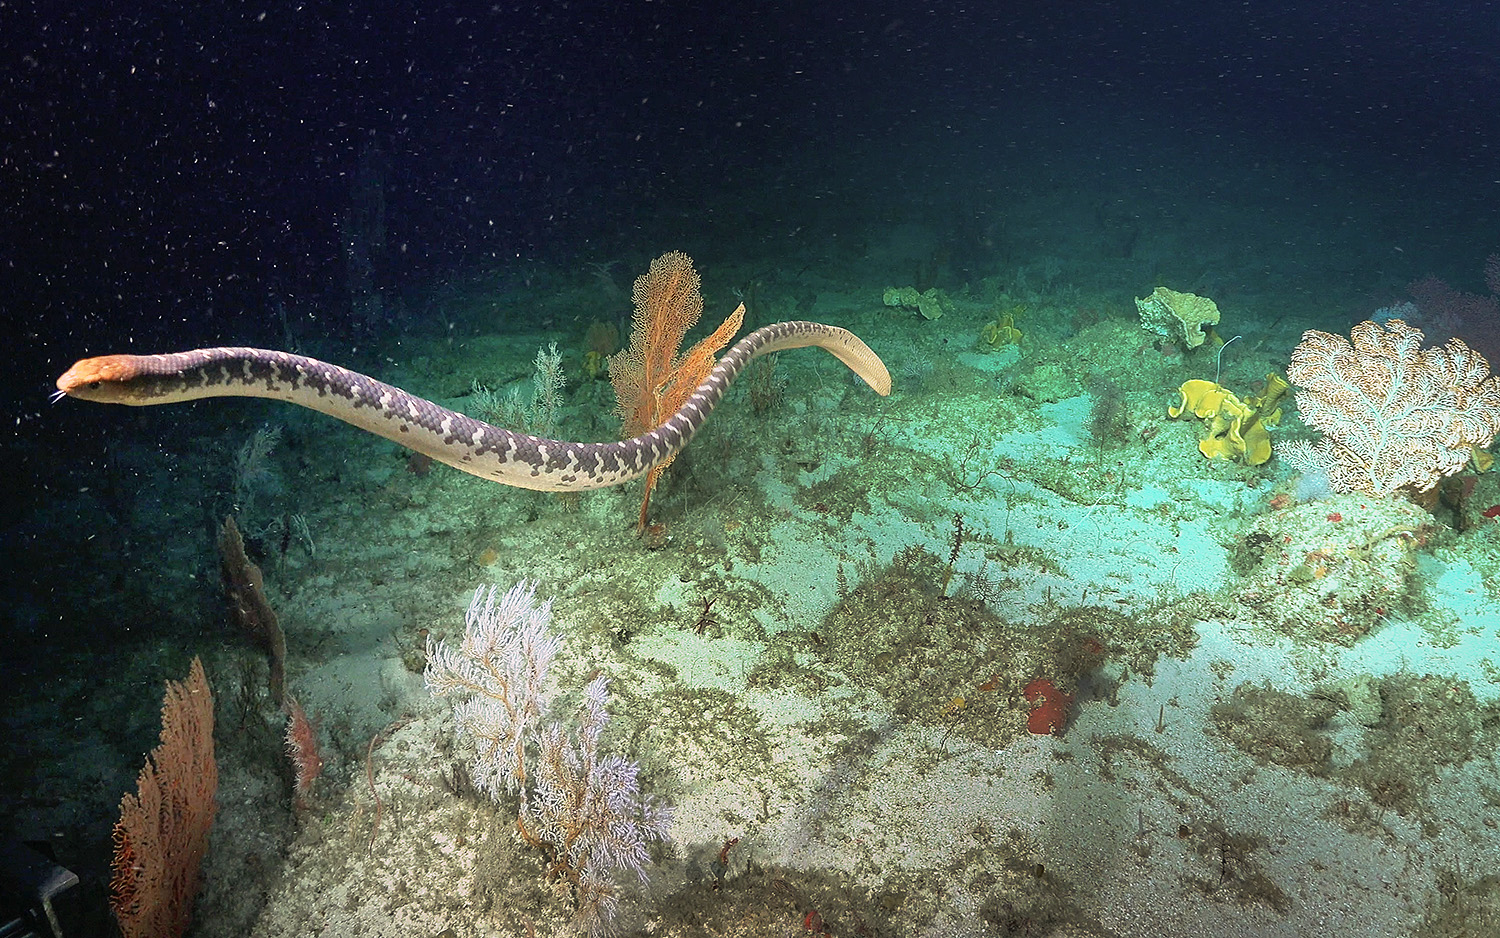 On dive 415 April 21st 2021, ROV SuBastian photographs a sea snake swimming along the sea floor of Ashmore Reef.  Sea snakes were once quite abundant at Ashmore Reef but  in recent decades they’ve largely disappeared. During the expedition a large number of sea snakes have been sited at depths between 50m-150m including a previously thought locally extinct short nosed sea snake.